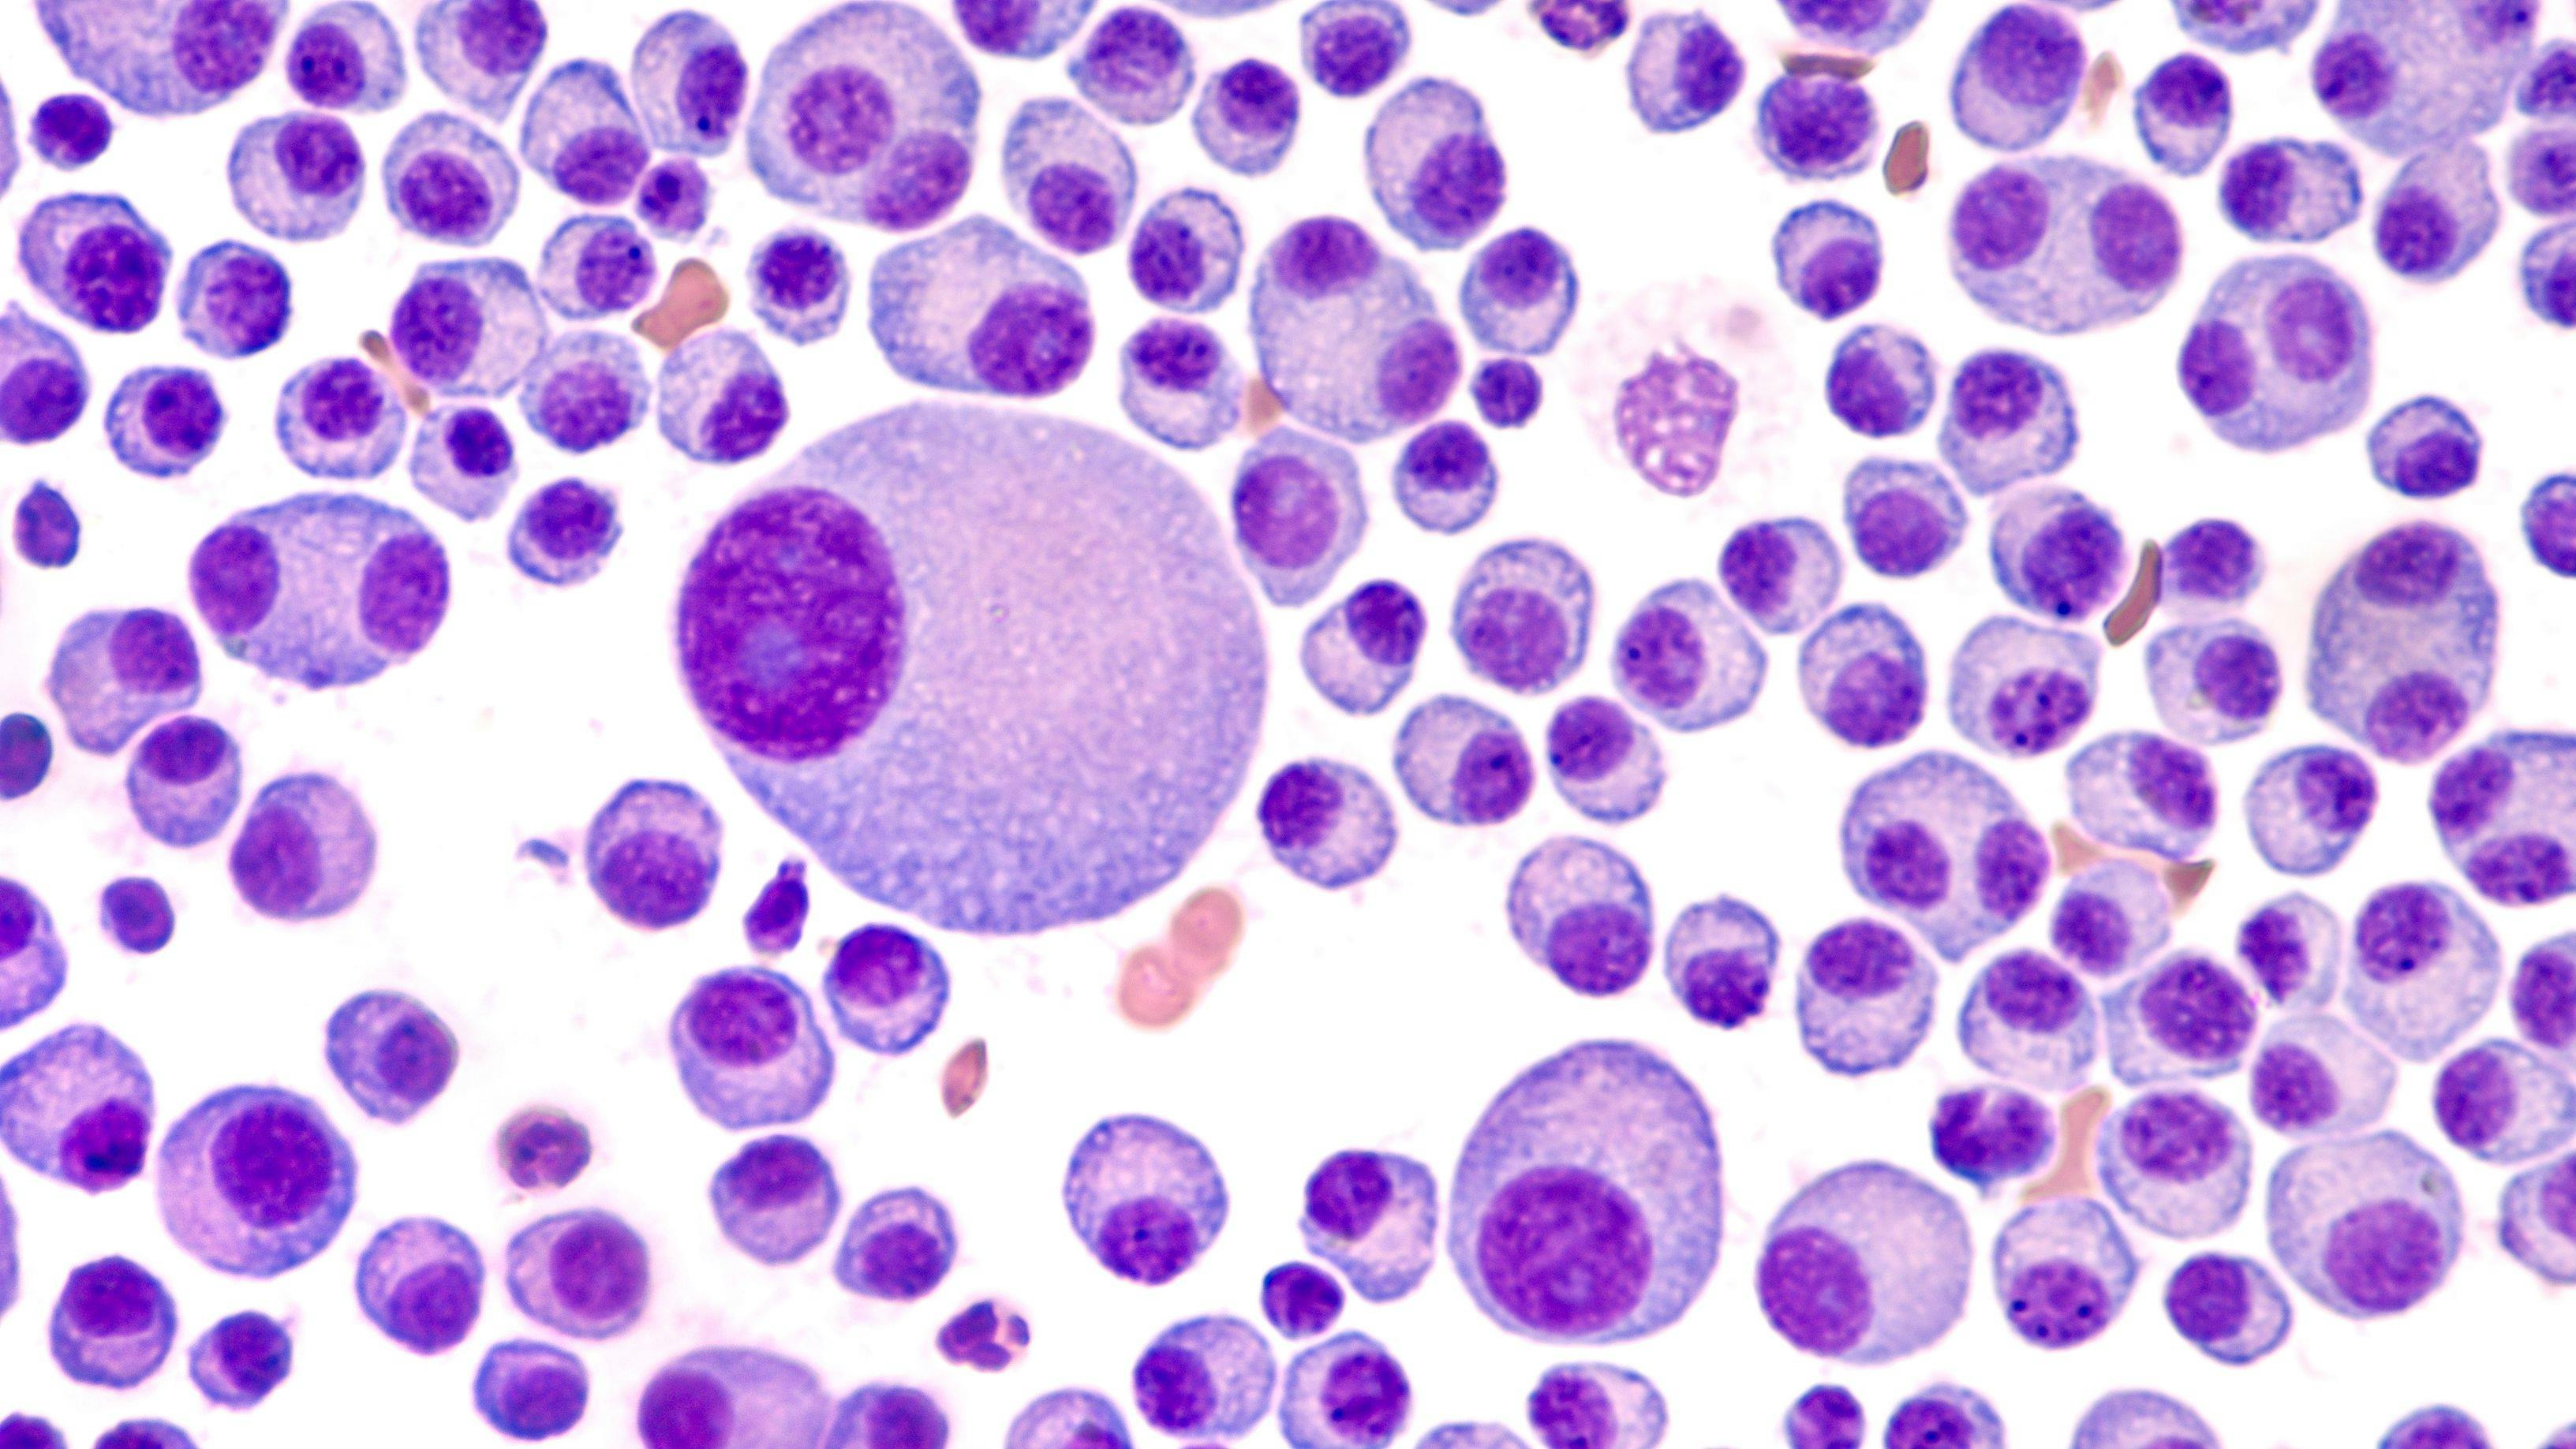 Daratumumab Demonstrates Benefit to Overall Survival for Certain Patients with Multiple Myeloma